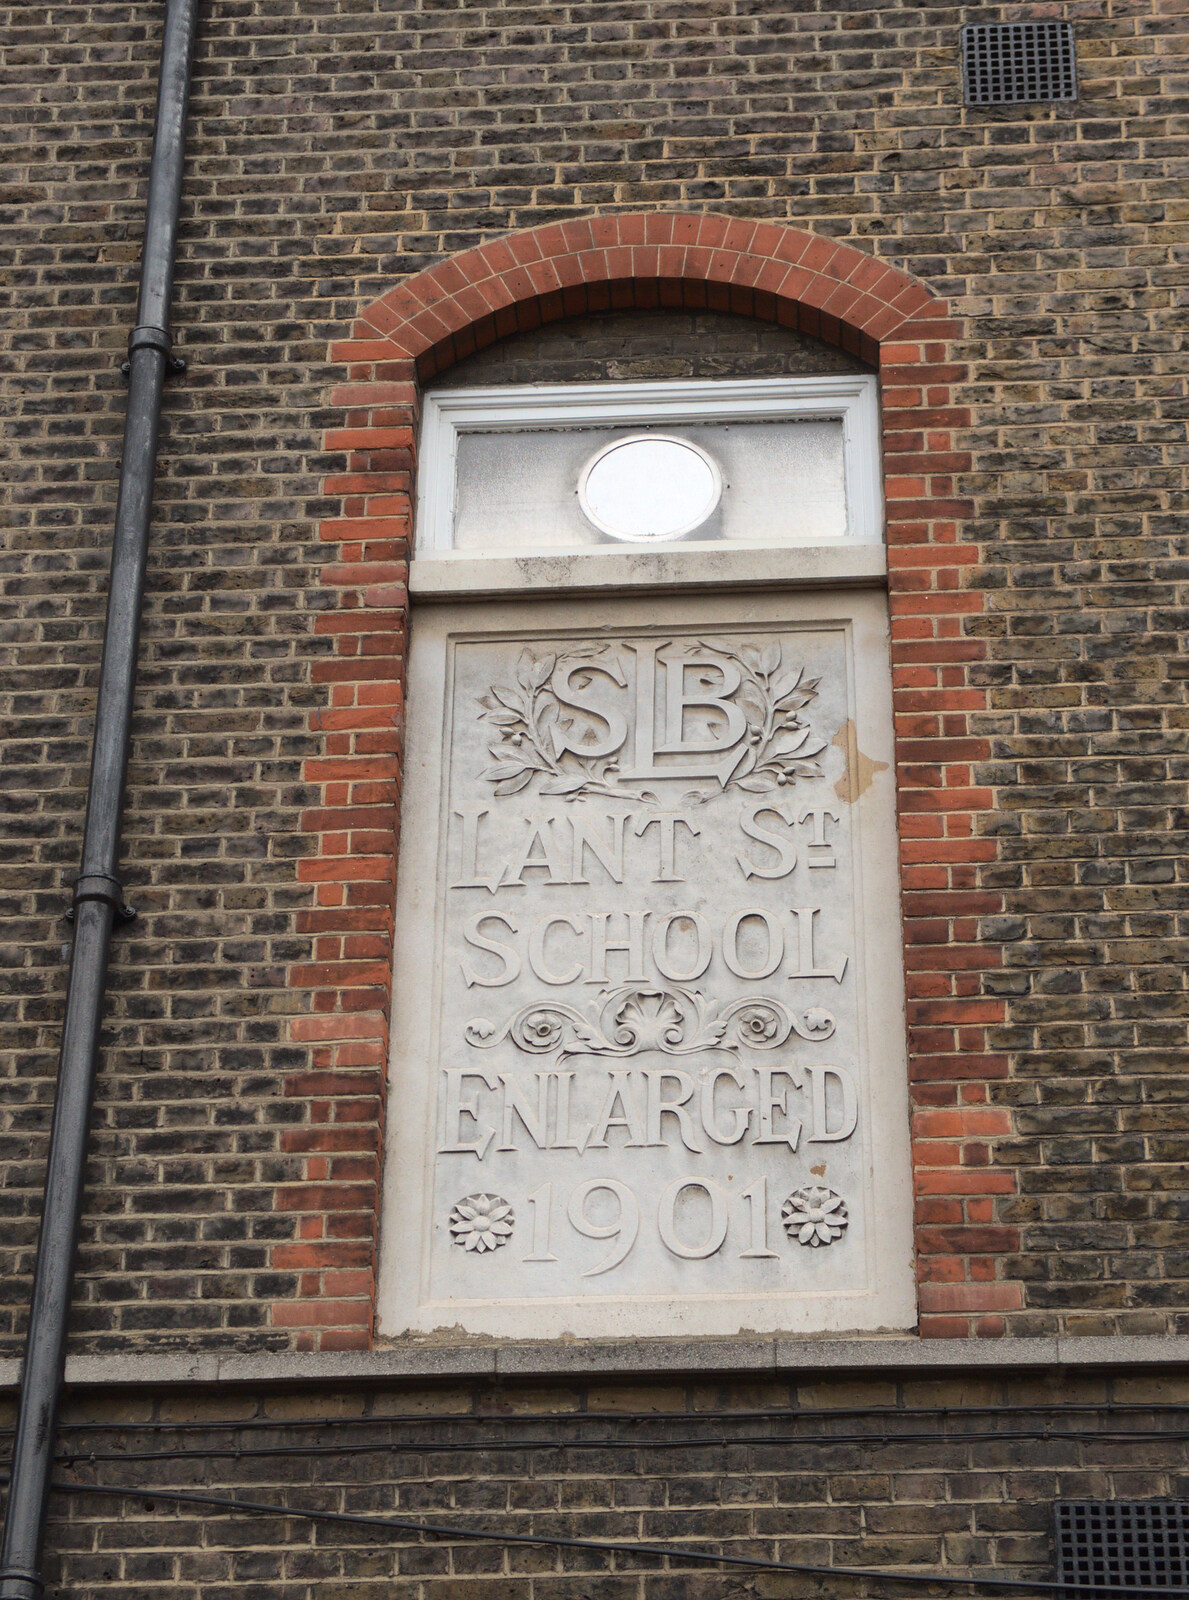 A nice 1901 carved sign for Lant Street School from SwiftKey Innovation Day, and Pizza Pub, Westminster and Southwark - 14th August 2014